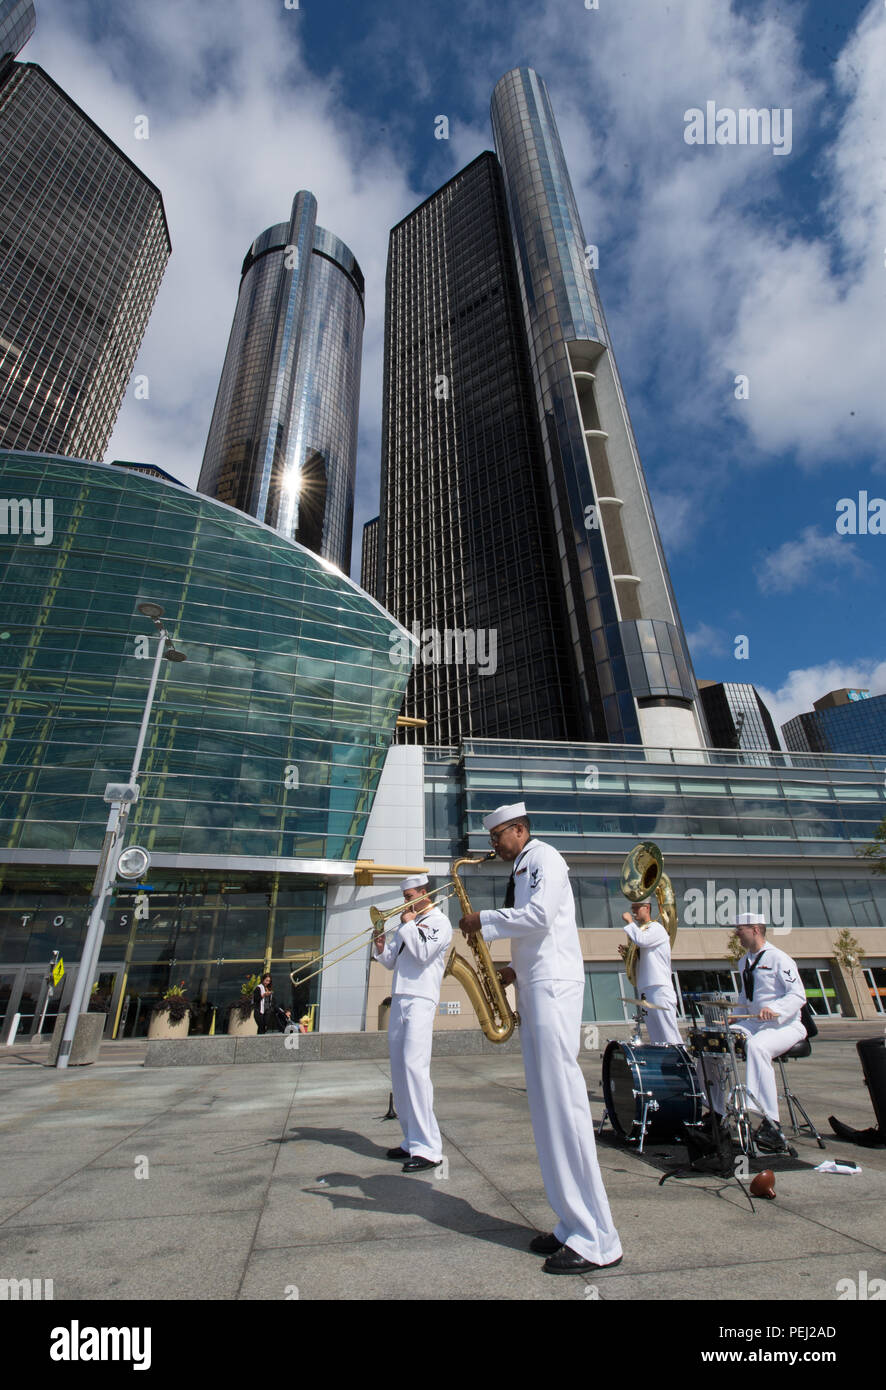 150826-N-CI175-001 DETROIT, Mich. (Aug. 26, 2015) Musicians assigned to the Navy Band Great Lakes Brass Band perform in front of the Renaissance Center along Detroit’s downtown RiverWalk as part of Detroit Navy Week. Navy Weeks focus a variety of assets, equipment and personnel on a single city for a week-long series of engagements designed to bring America's Navy closer to the people it protects, in cities that don't have a large naval presence. (U.S. Navy photo by Mass Communication Specialist 1st Class Jon Rasmussen/Released) Stock Photo